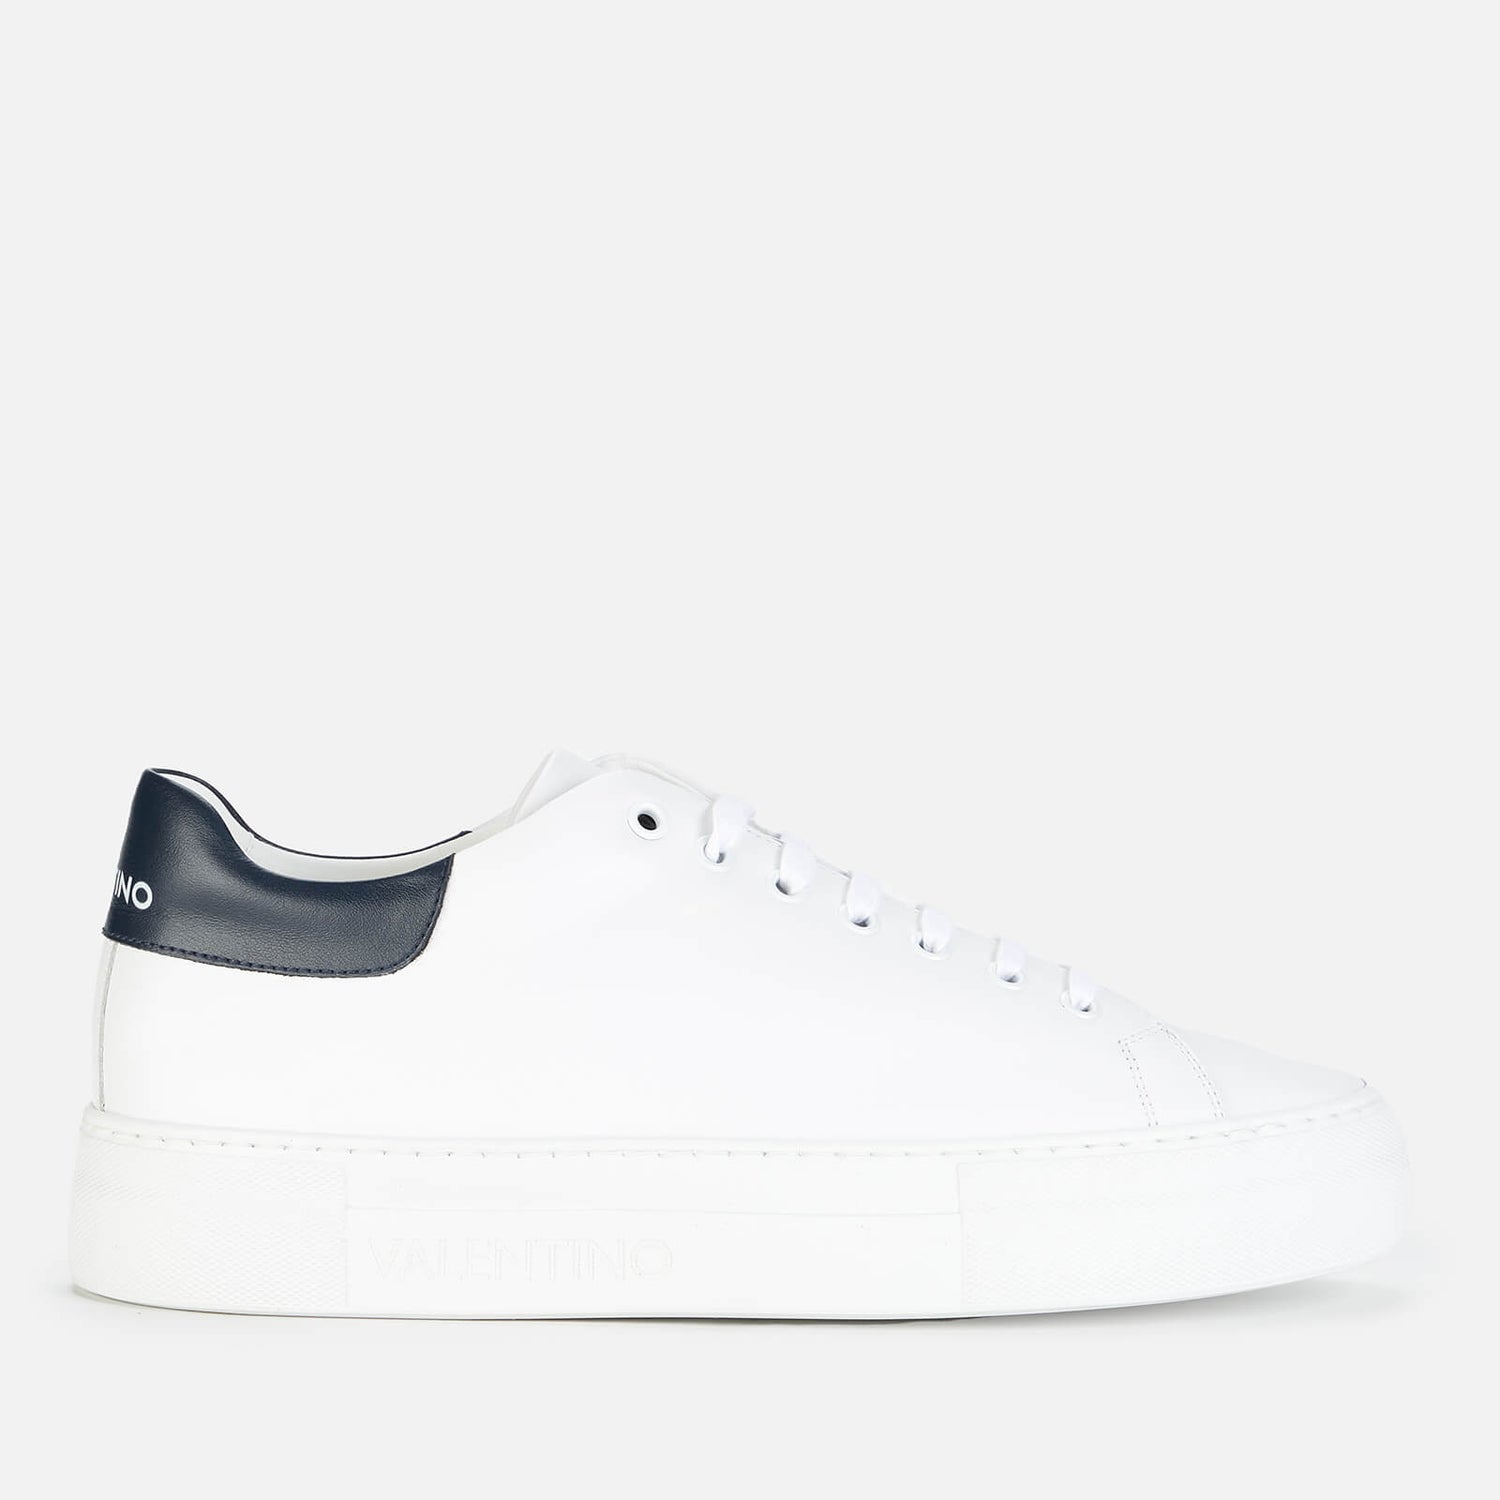 Valentino Shoes Men's Leather Cupsole Trainers - White/Blue - UK 11